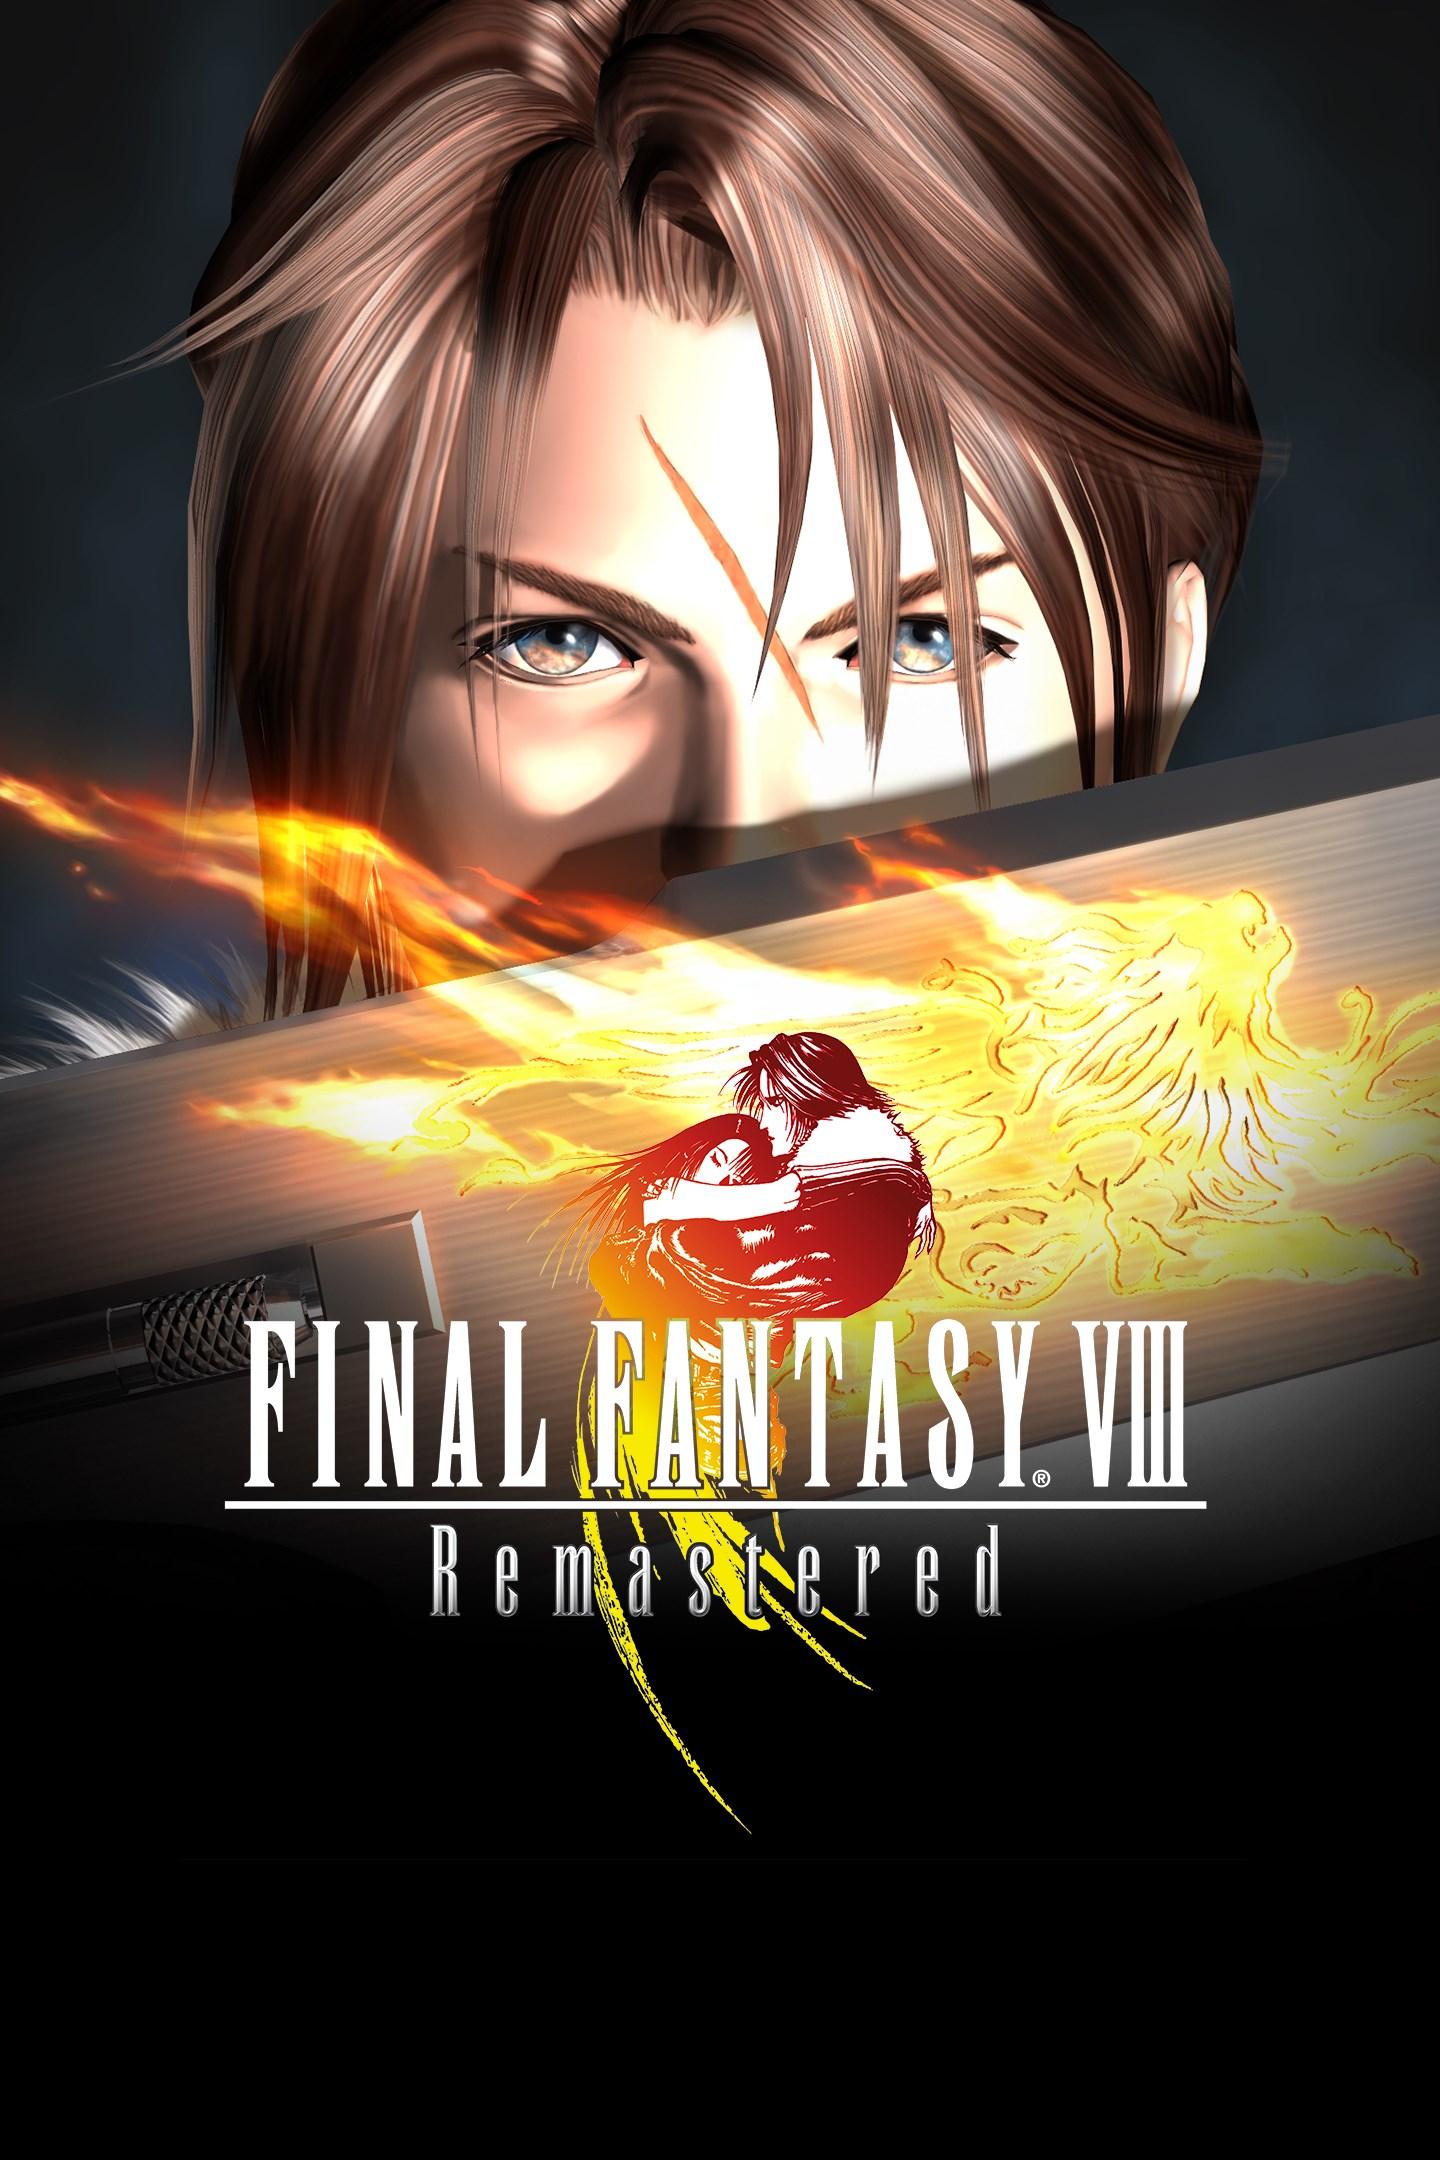 final-fantasy-viii-remastered-ps4-gets-a-physical-release-in-europe-for-19-99-according-to